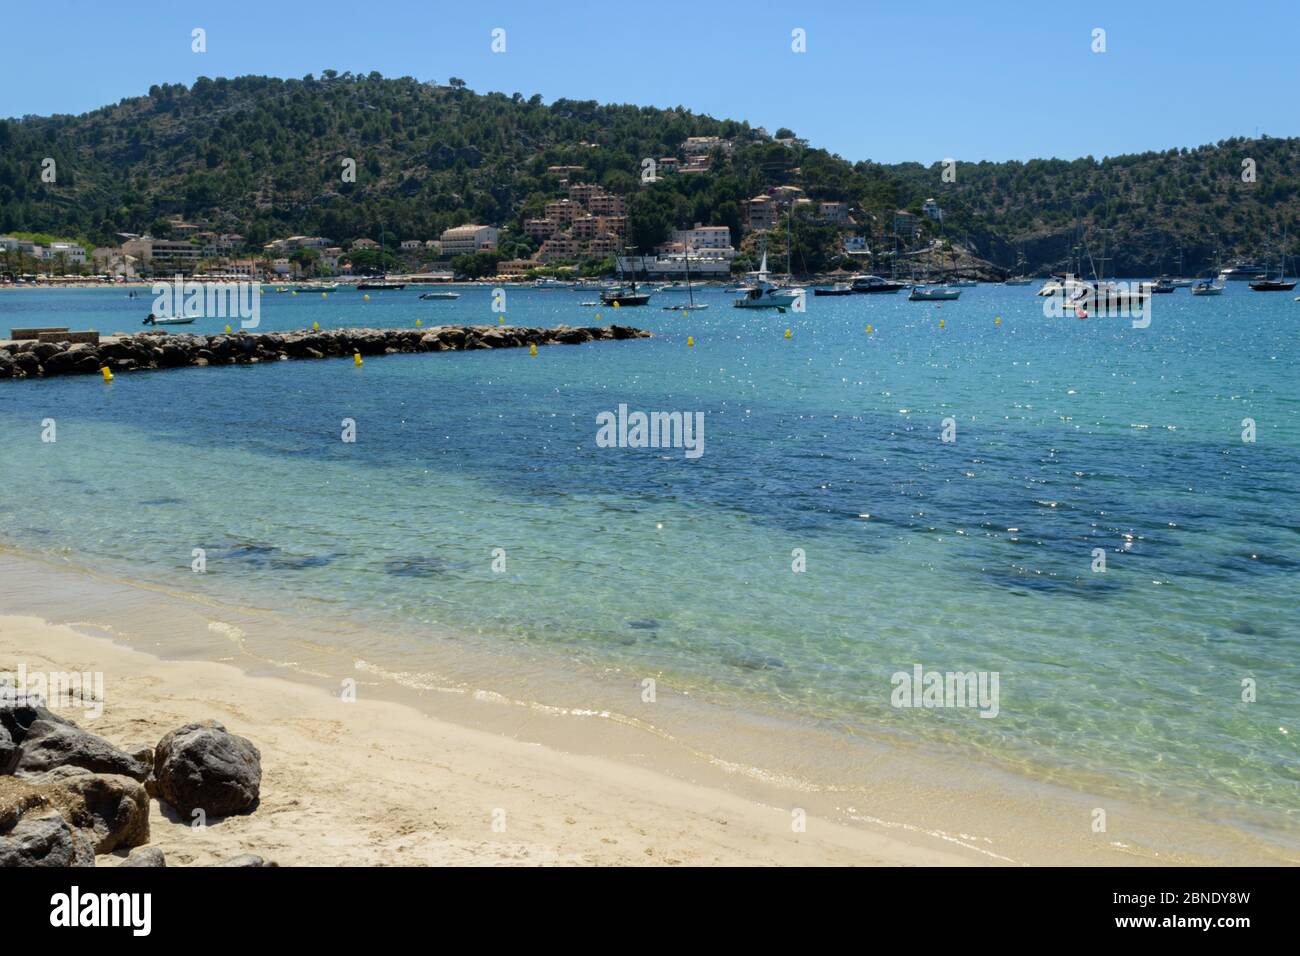 Beautiful clear blue water at the beach in Port de Soller, Mallorca, Spain Stock Photo